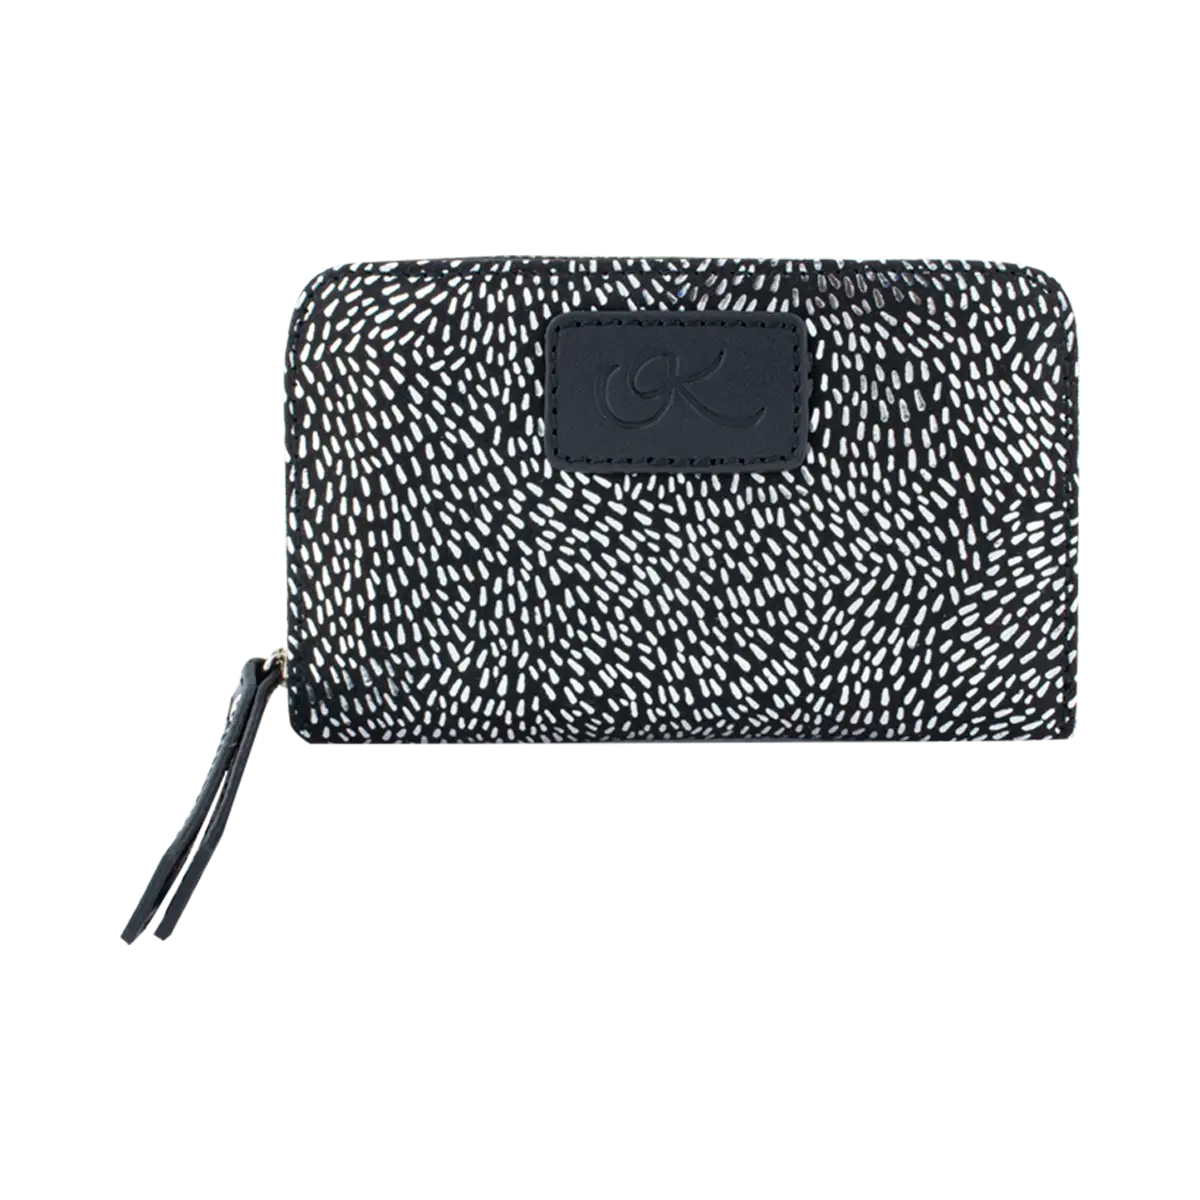 small black silver stripe print leather wallet. Fashion Accessories for women in San Diego, CA.